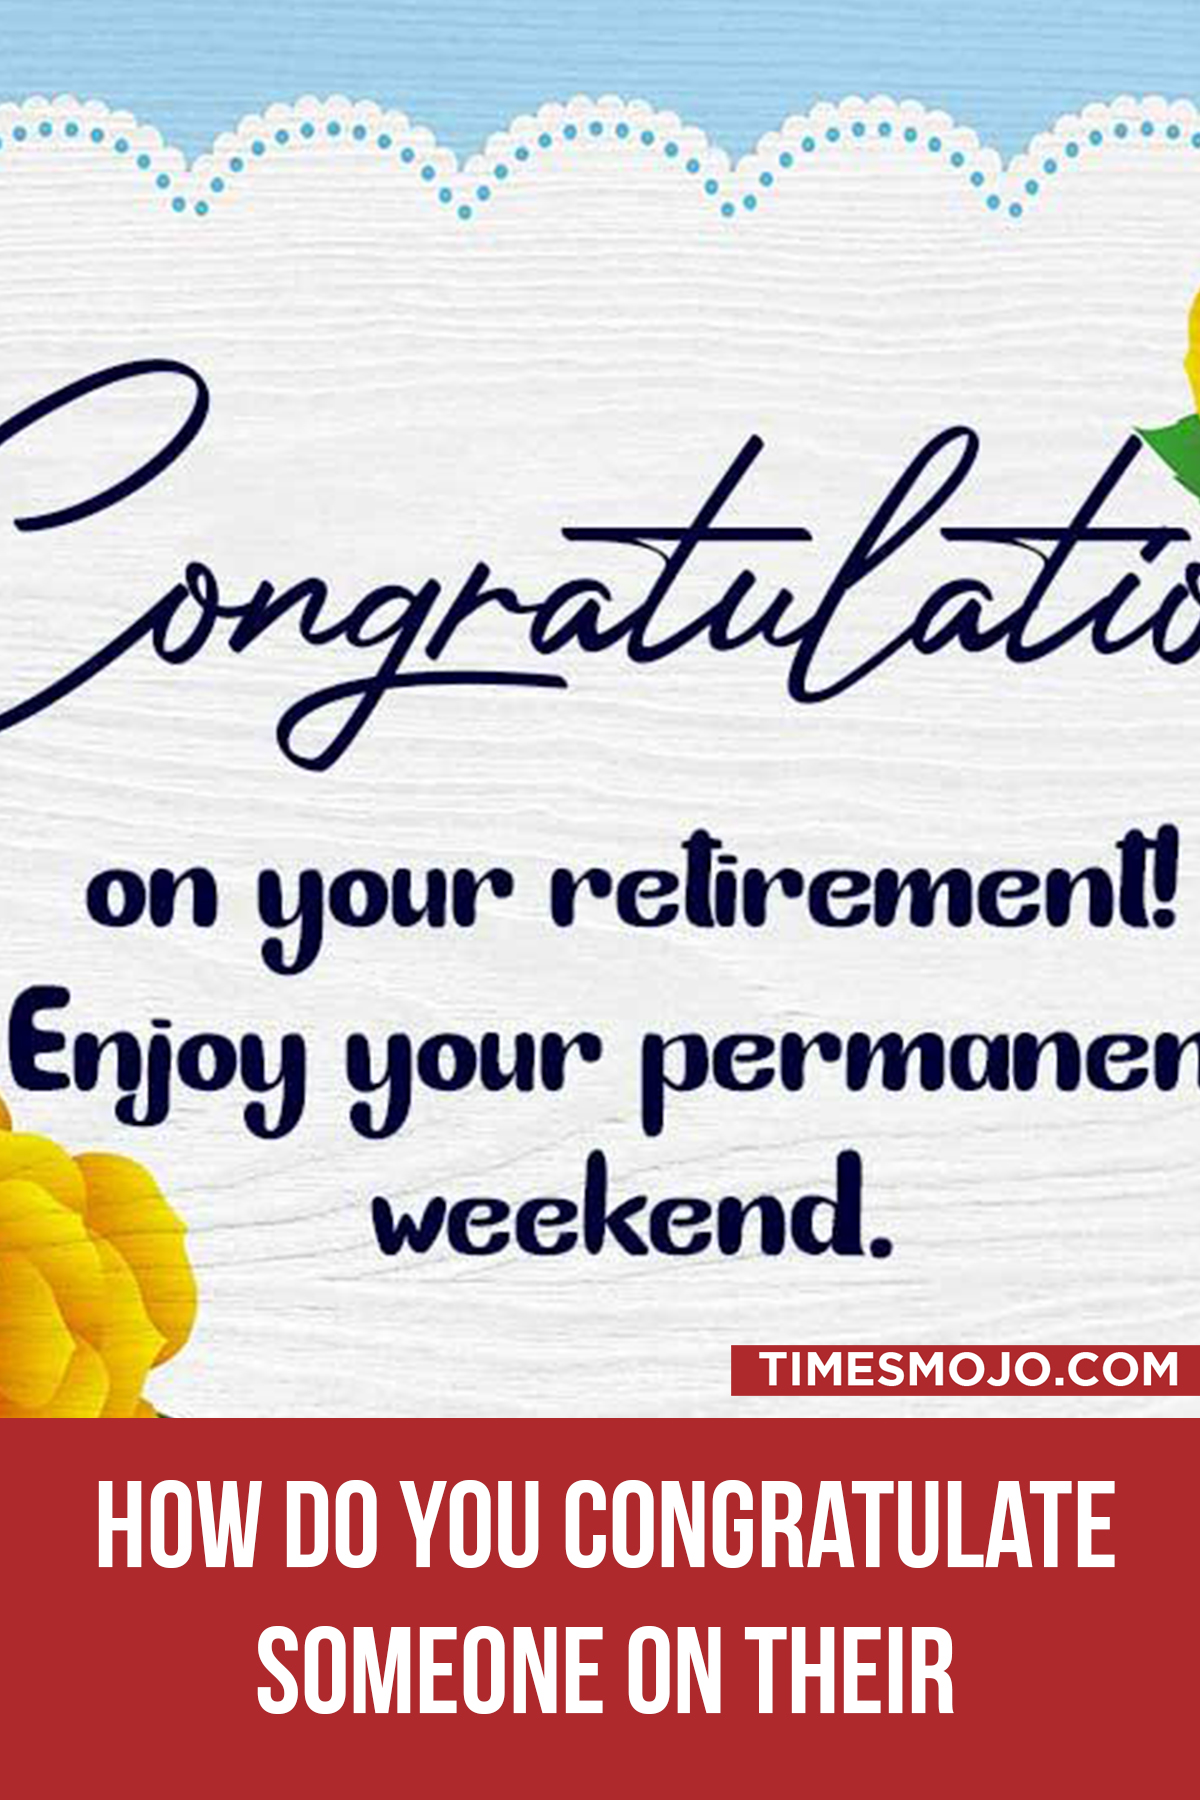 how-do-you-congratulate-someone-on-their-retirement-timesmojo